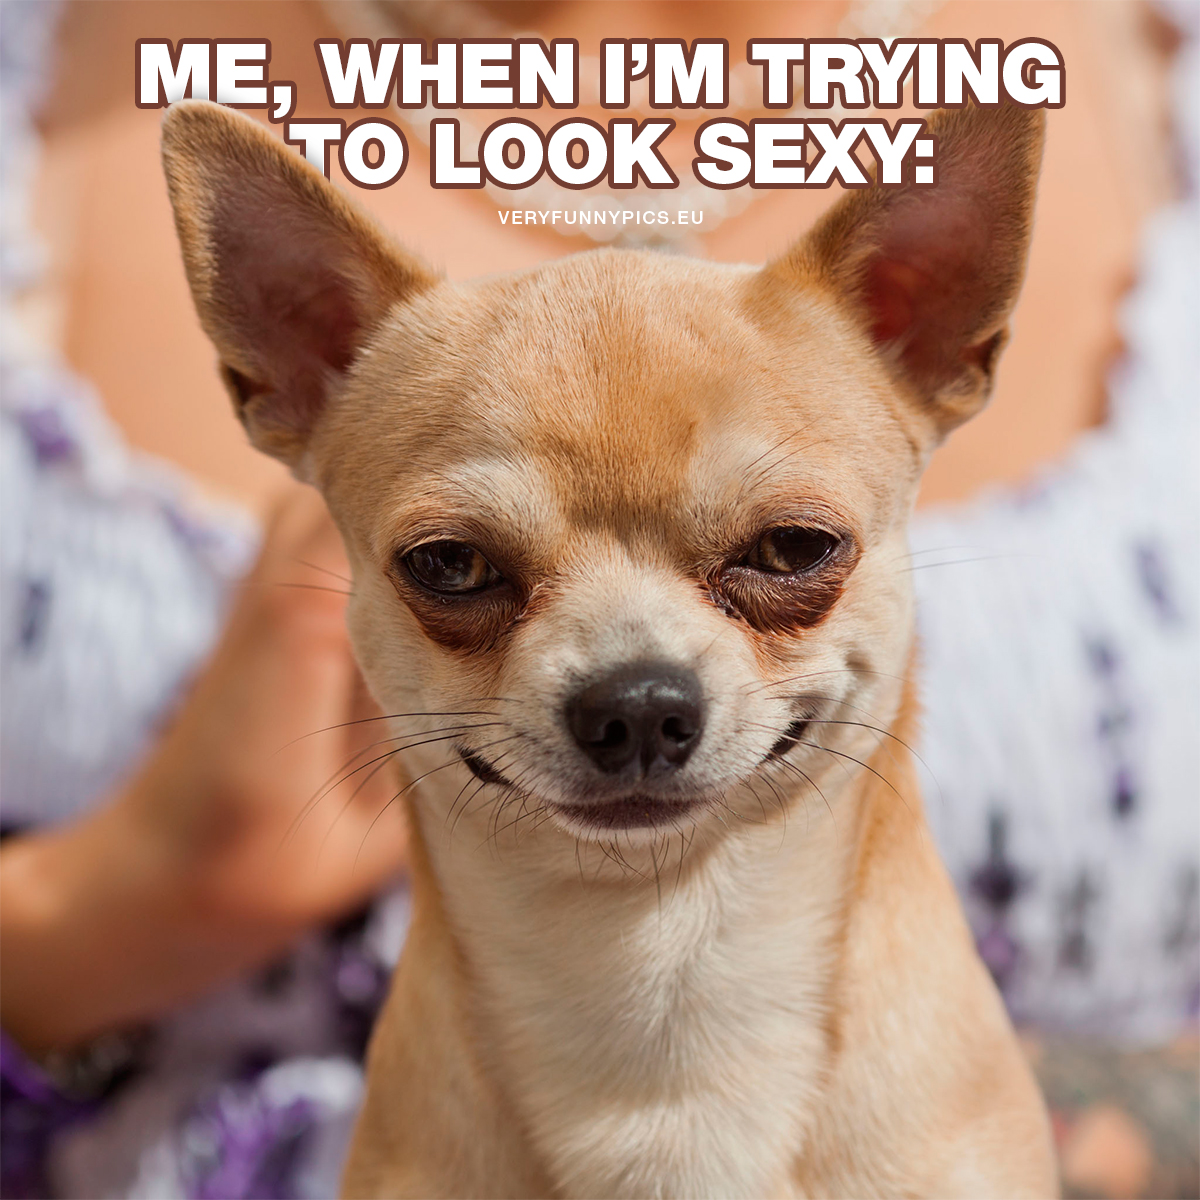 Dog with bedroom eyes - Me, when i'm trying to look sexy